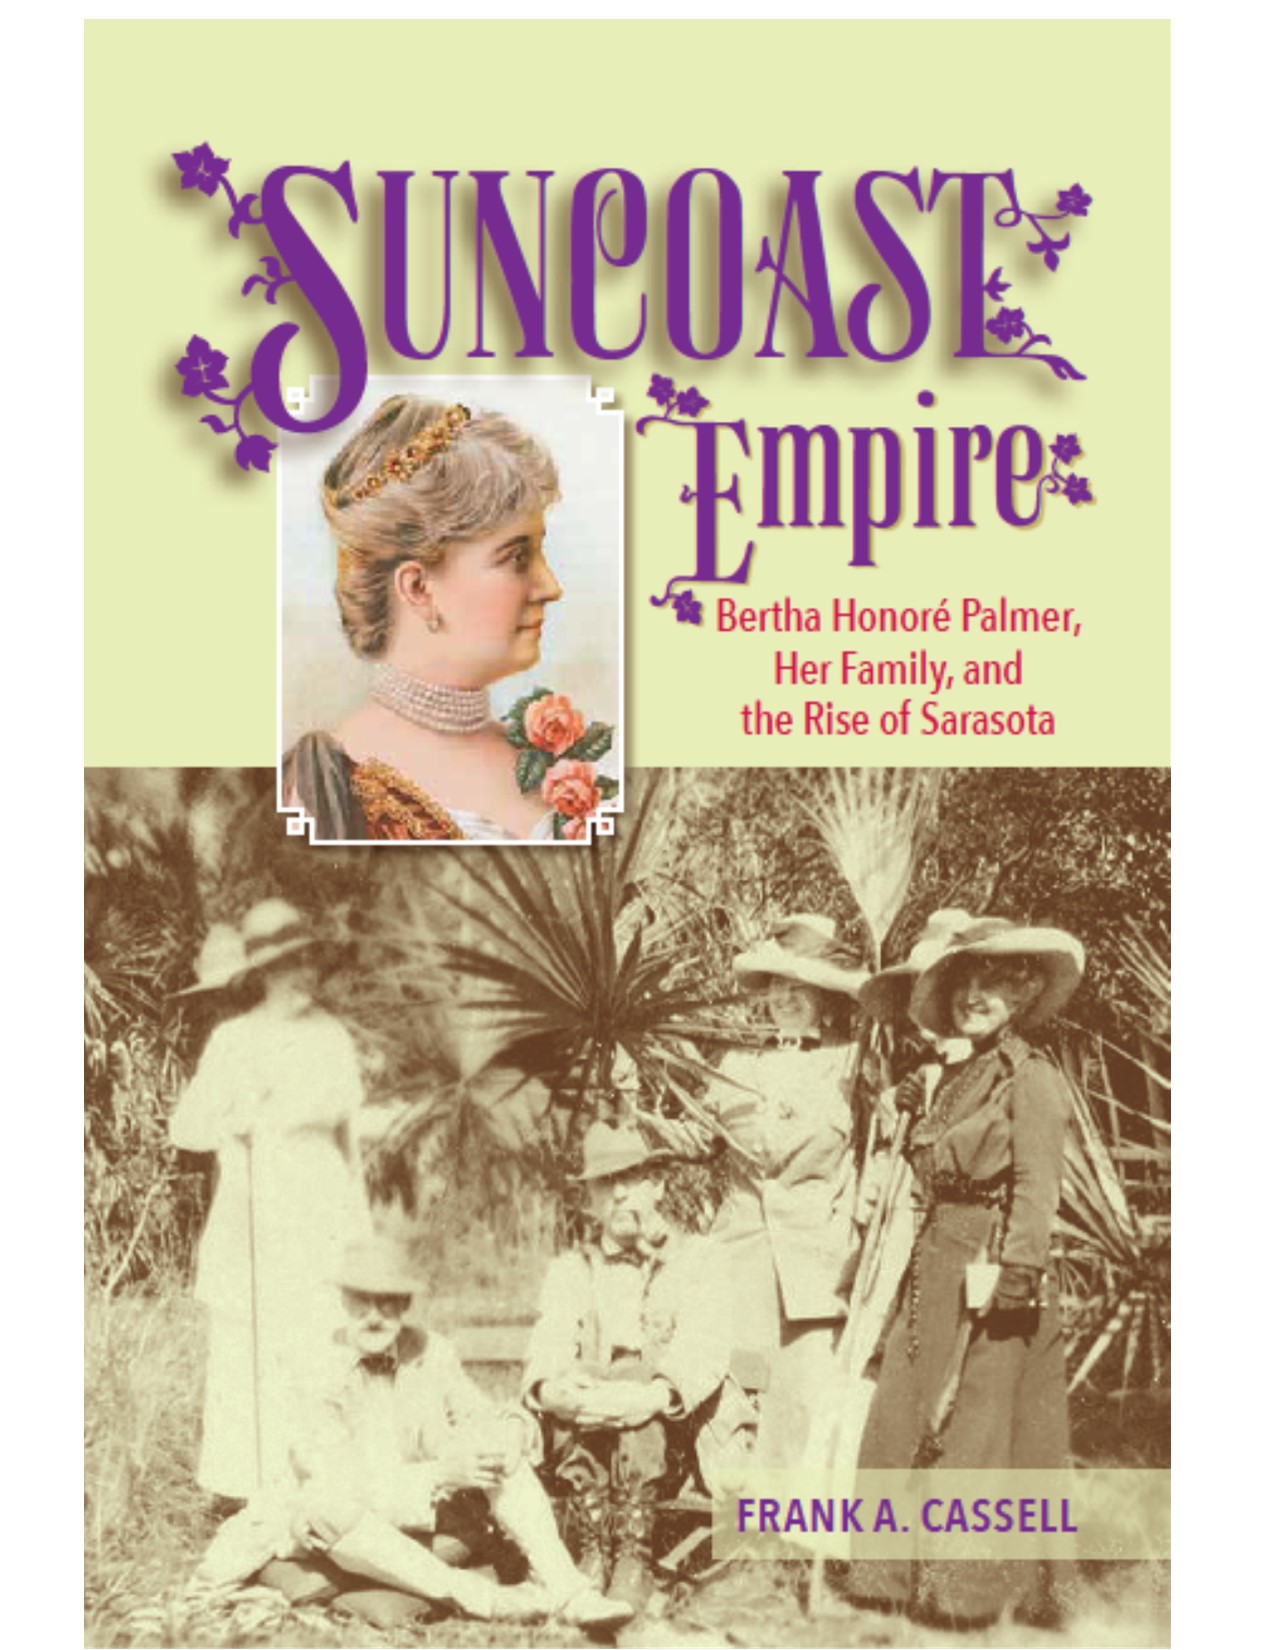 Suncoast Empire: Bertha Honoré Palmer, Her Family, and the Rise of Sarasota, 1910-1982 by Frank Cassell